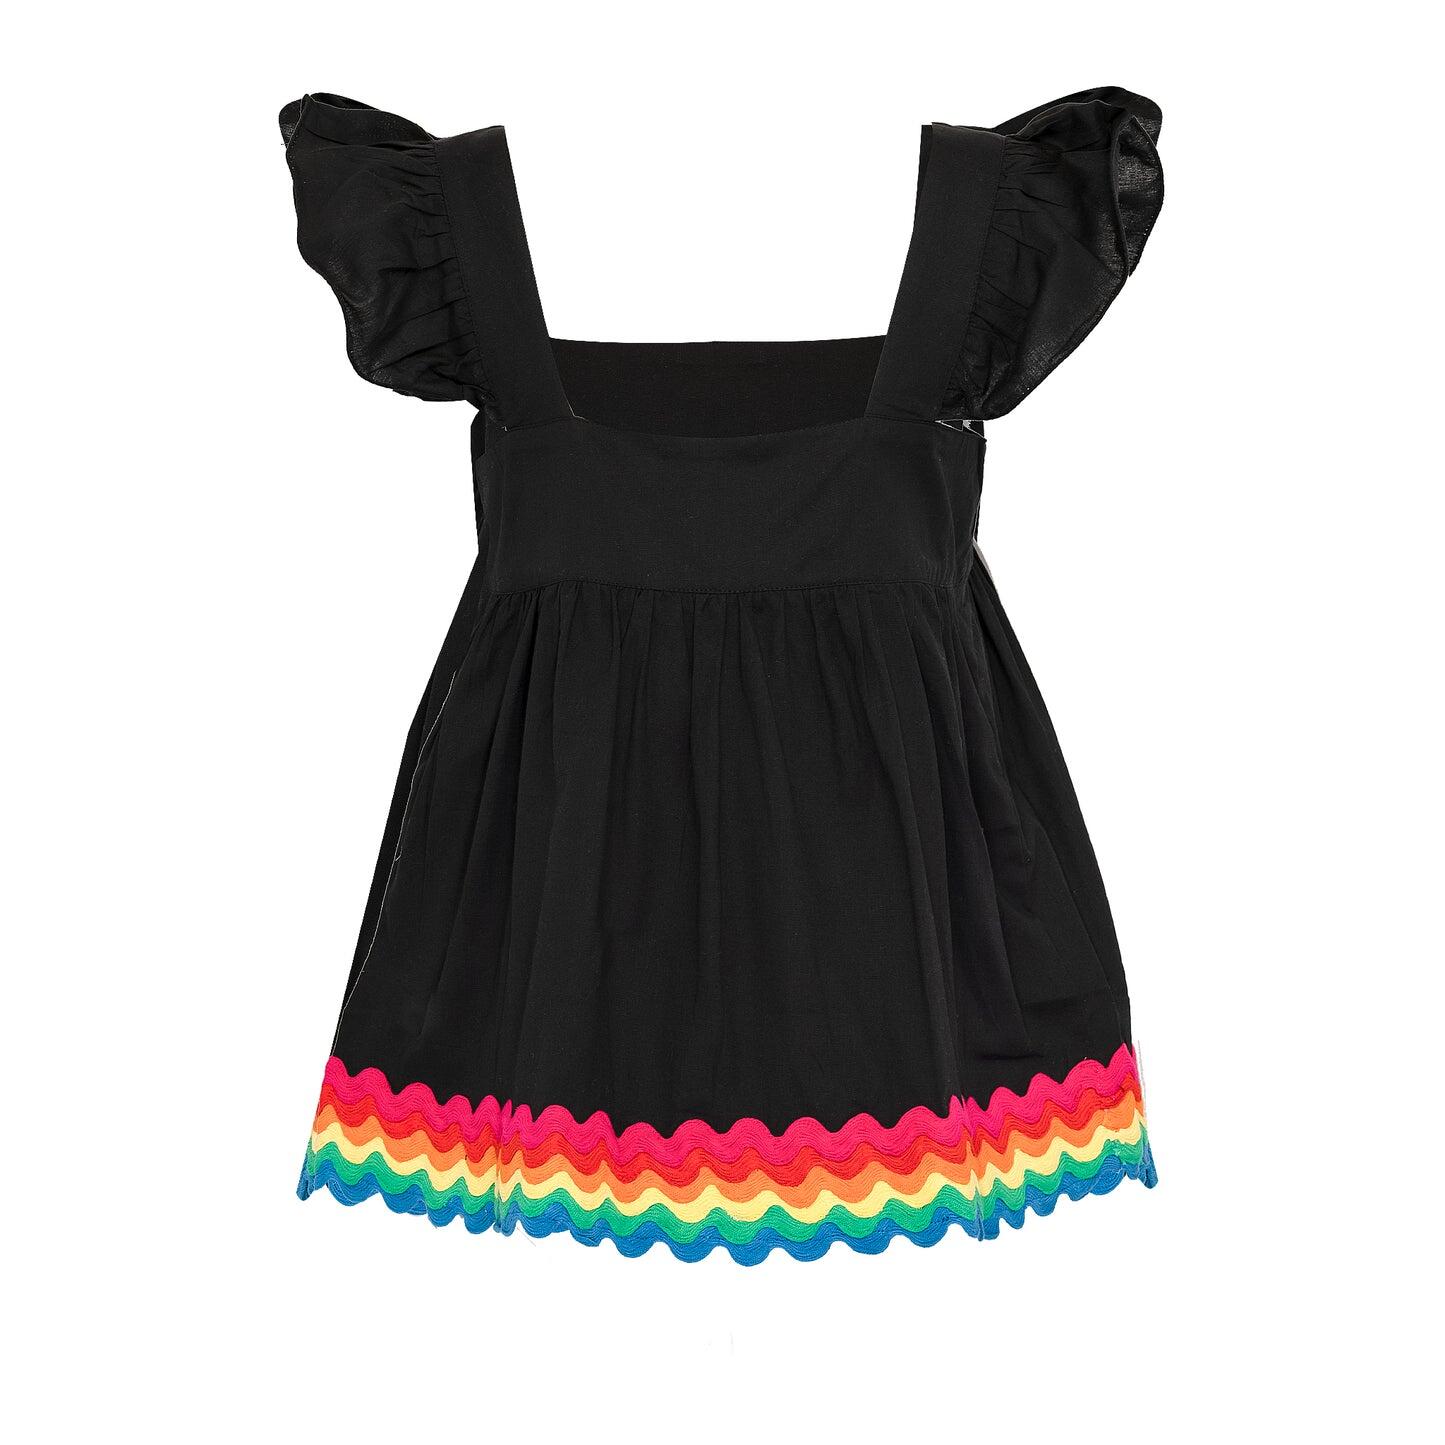 Load image into Gallery viewer, Baby Doll Top with Rainbow Ric Rac Trim - Lined Black/Rainbow Bright
